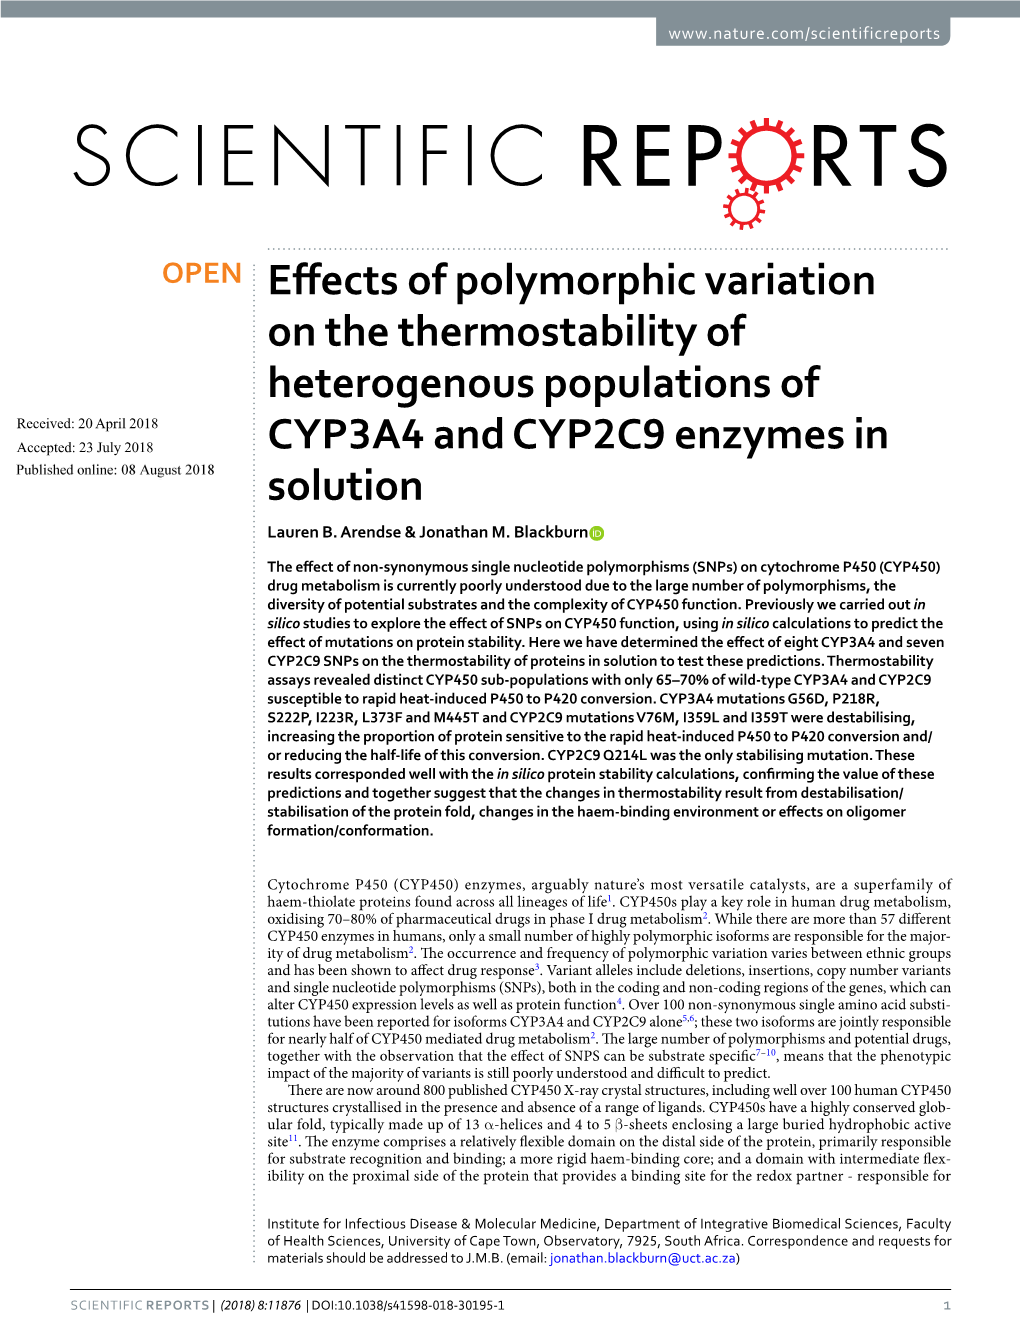 Effects of Polymorphic Variation on the Thermostability of Heterogenous